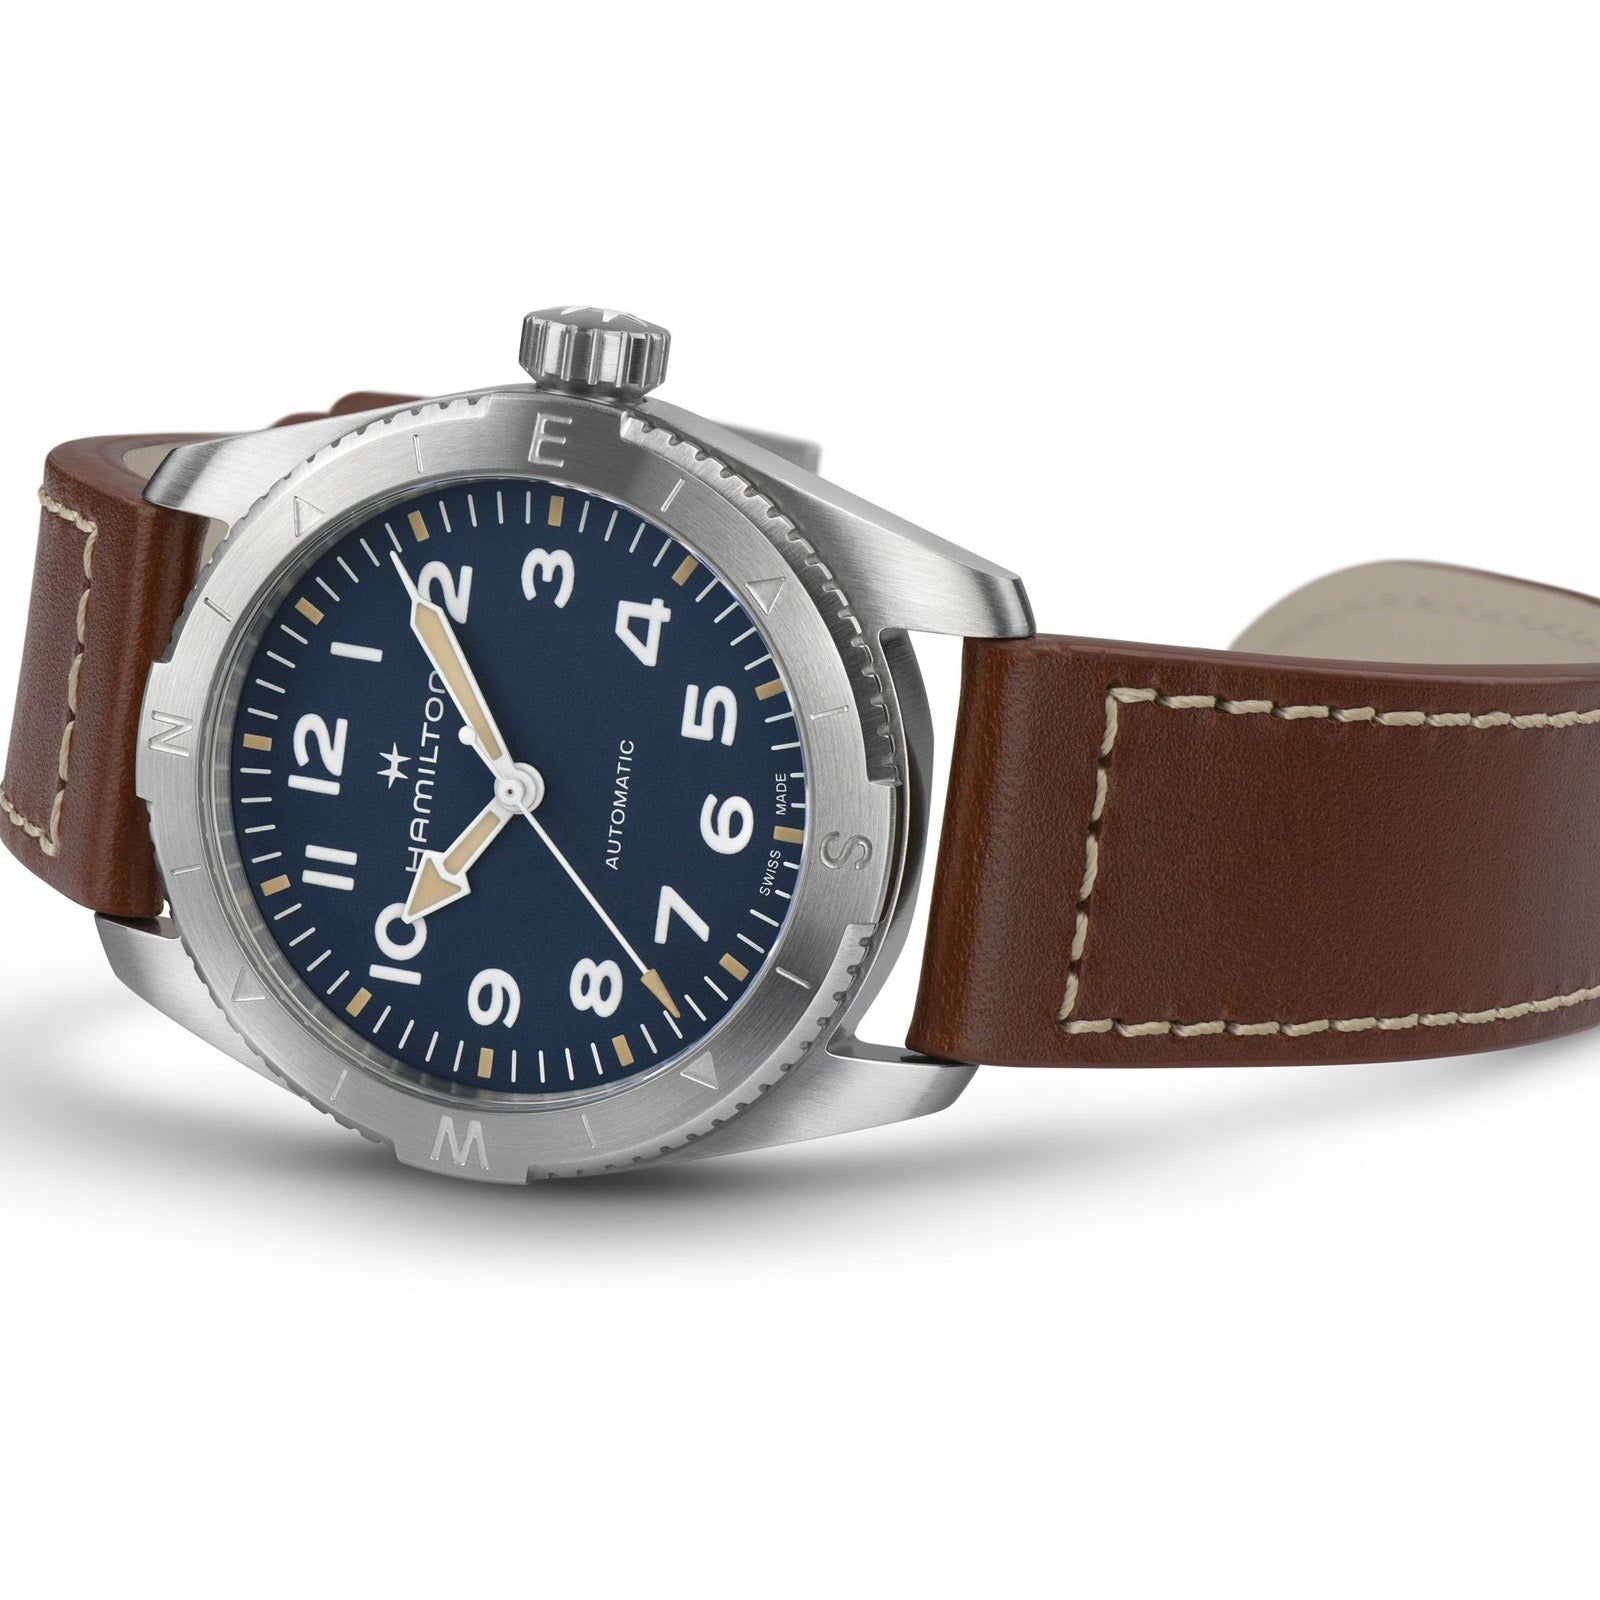 Khaki Field Expedition 37mm Auto H70225540